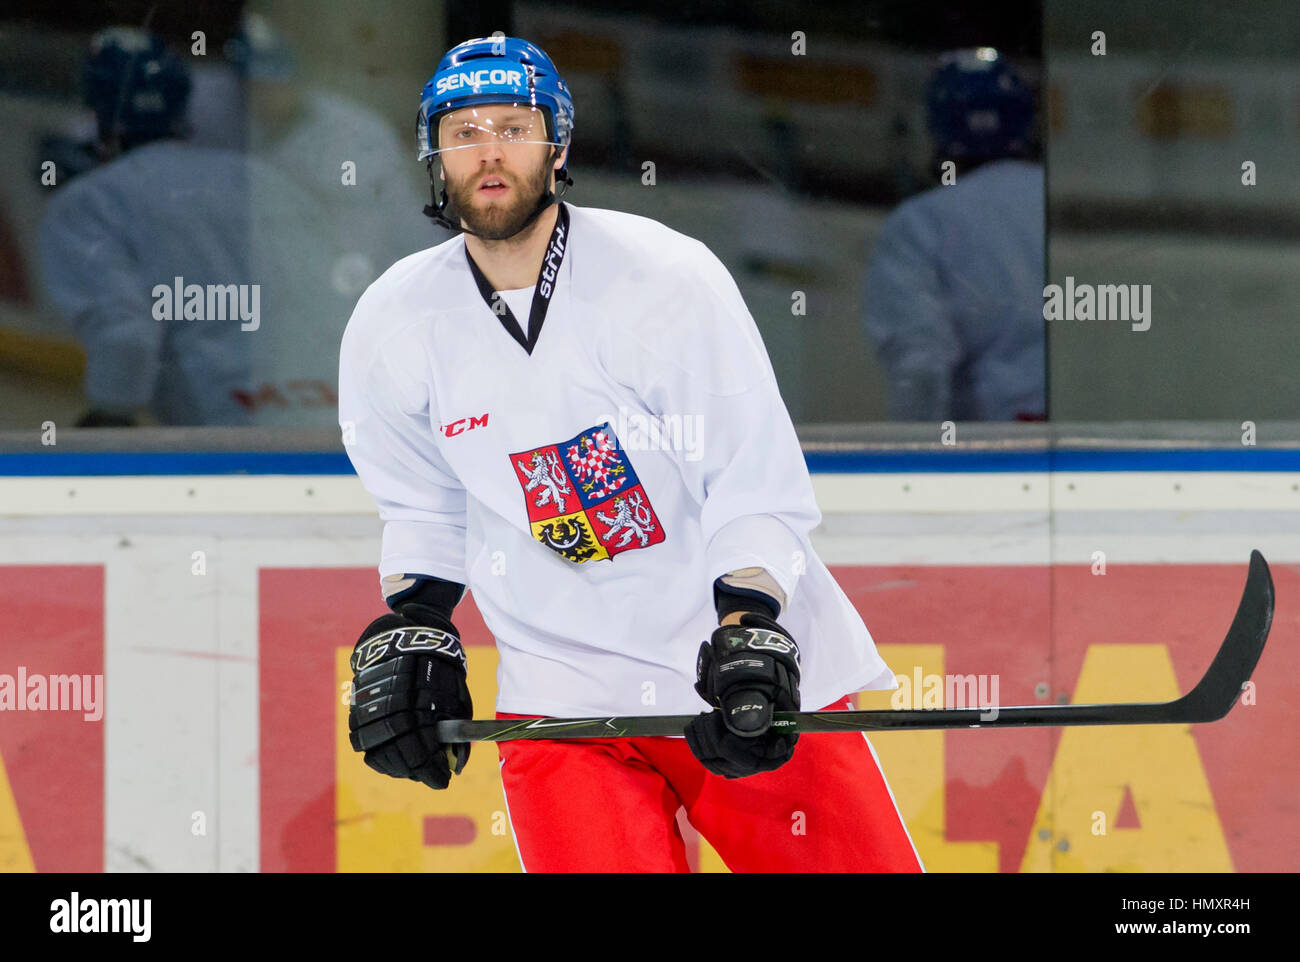 Prague, Czech Republic. 07th Feb, 2017. The Czech national ice-hockey team's player Vladimir Ruzicka in action during the training session prior to the February Sweden Games in Gothenburg in Prague, Czech Republic, February 7, 2017. Sweden Games, the third part of the European Hockey Tour (EHT) series, will take place on February 9-12. Credit: Vit Simanek/CTK Photo/Alamy Live News Stock Photo